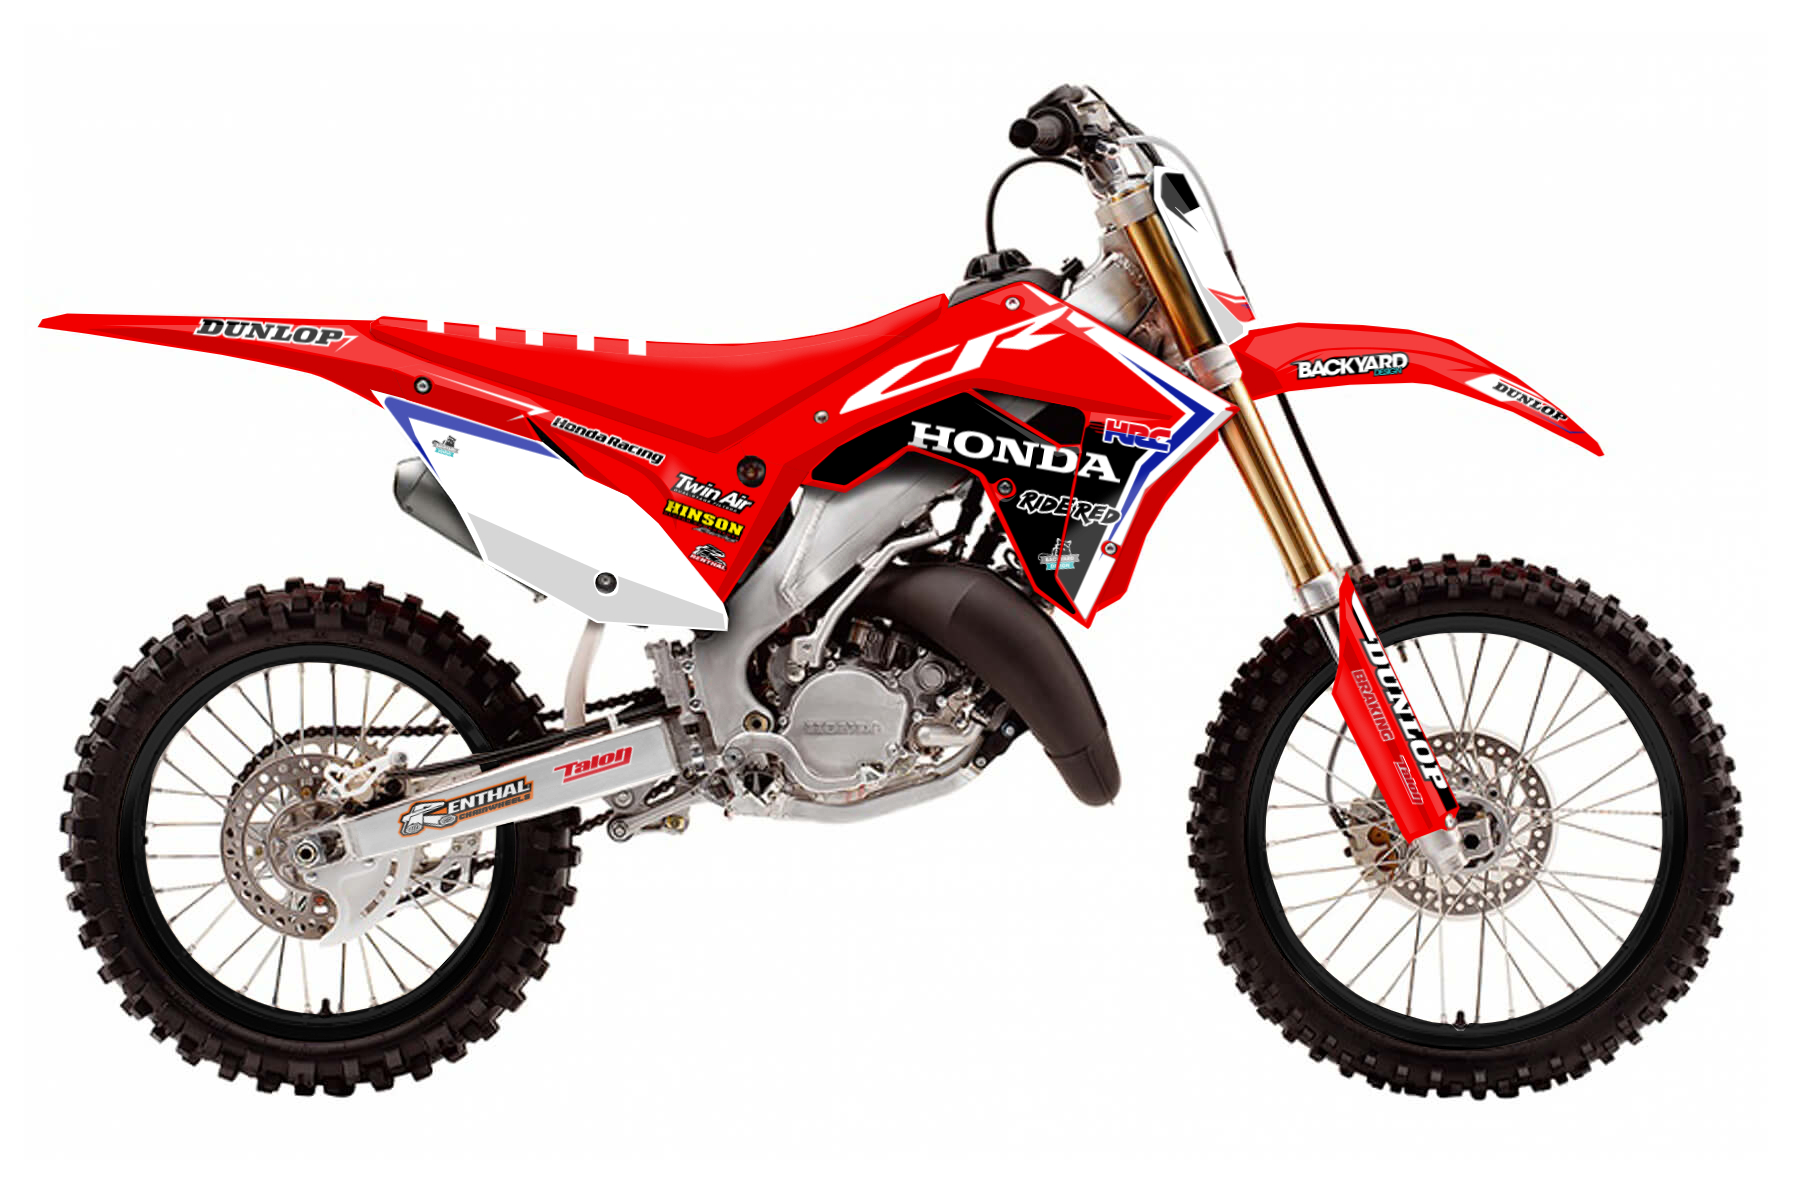 Honda CR 125 – Polisport Restyle
MX Graphic Kits

You love the look of your polisport restyle kit? We do too! A more aggressive look suits your CR 125. We deliver the perfect graphics for this one.